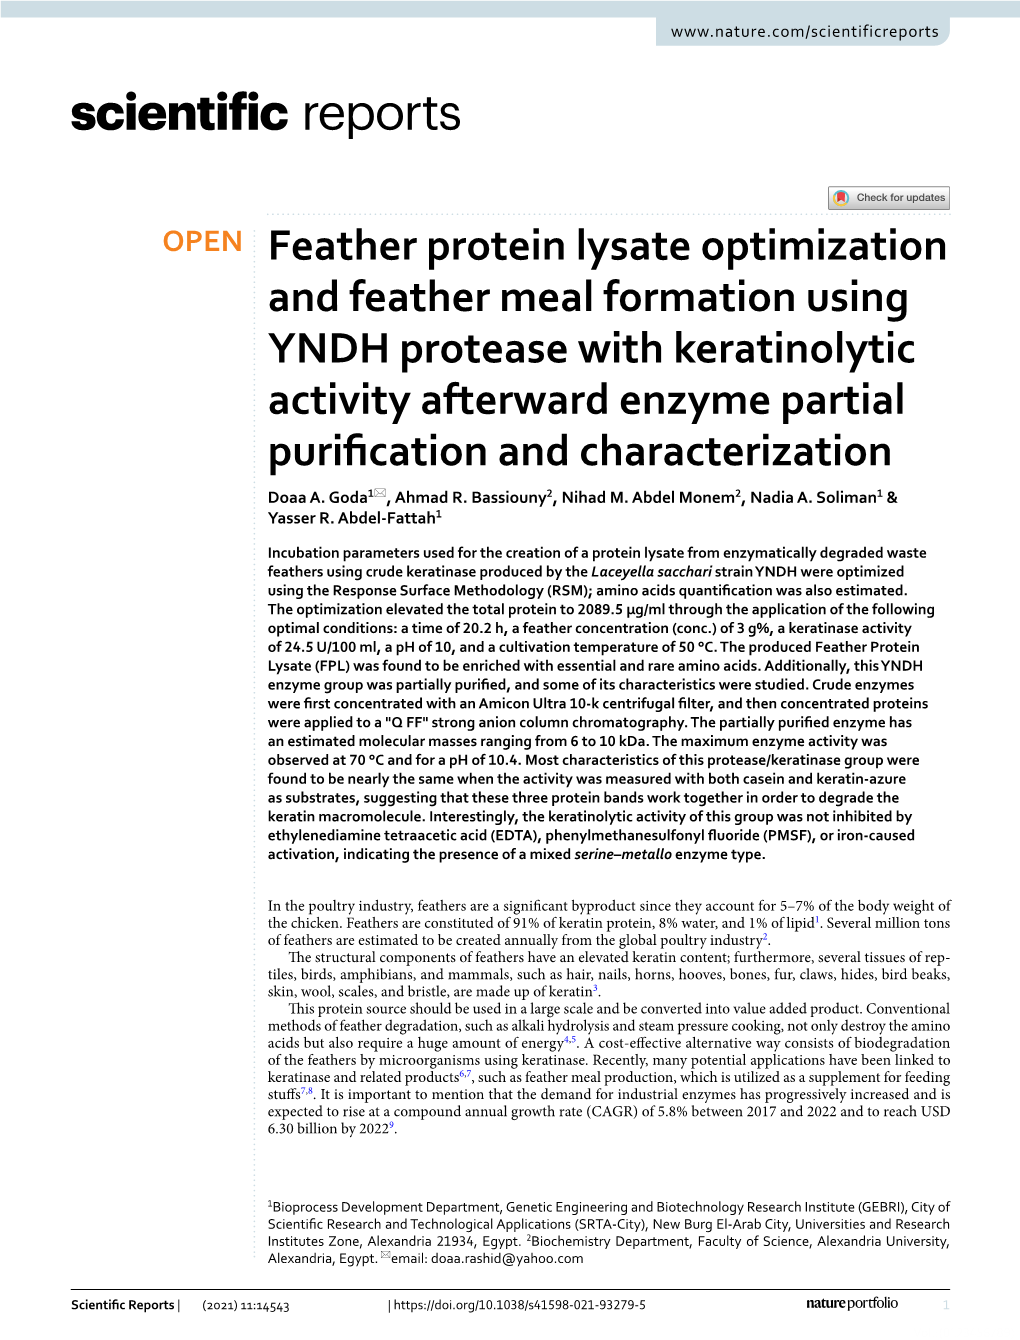 Feather Protein Lysate Optimization and Feather Meal Formation Using